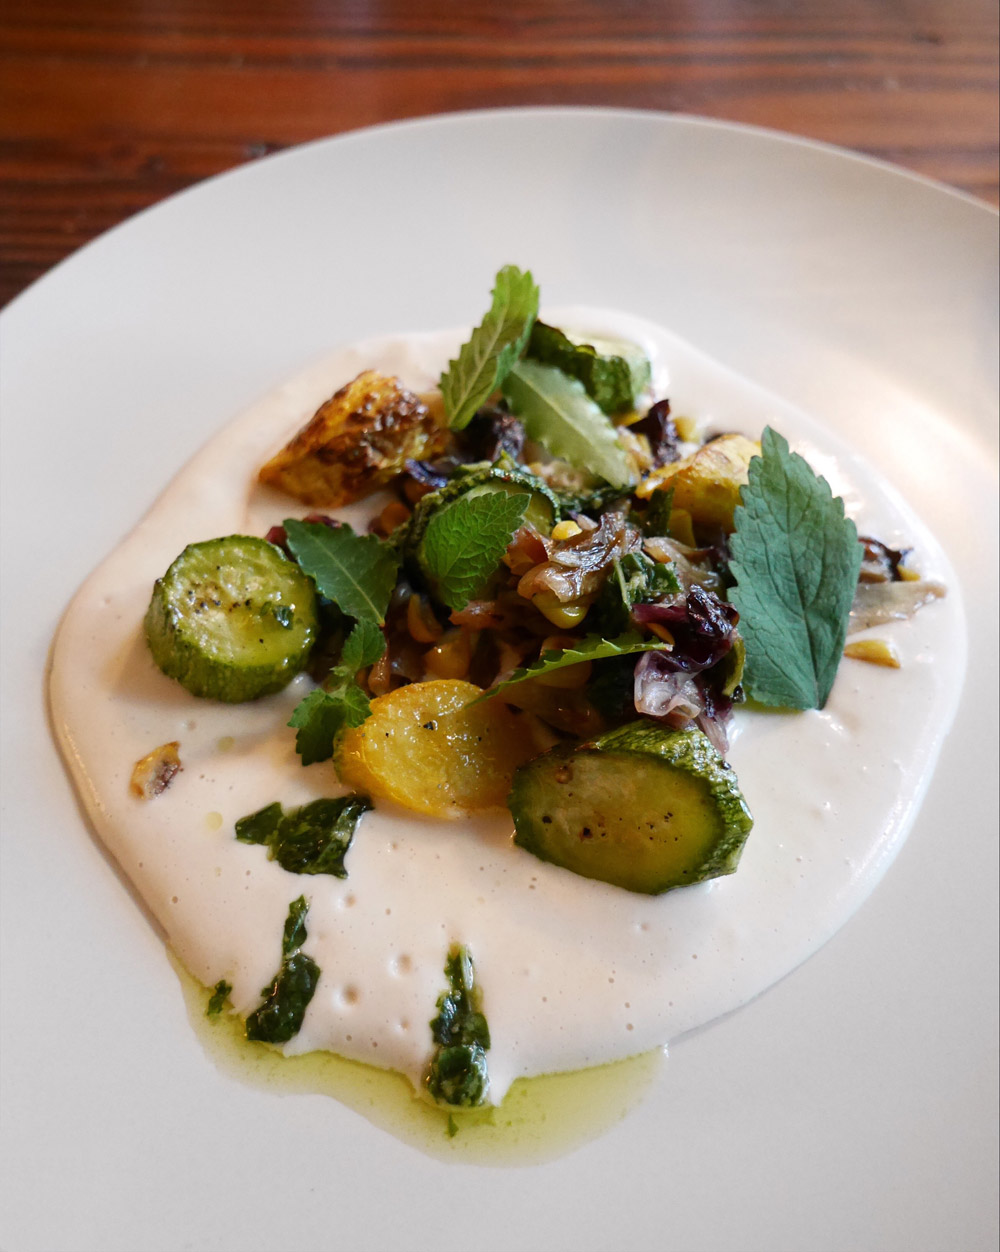 Heirloom Squash, Folklore Plant-Based Agrarian Popup by Sean Sigmon, Portland